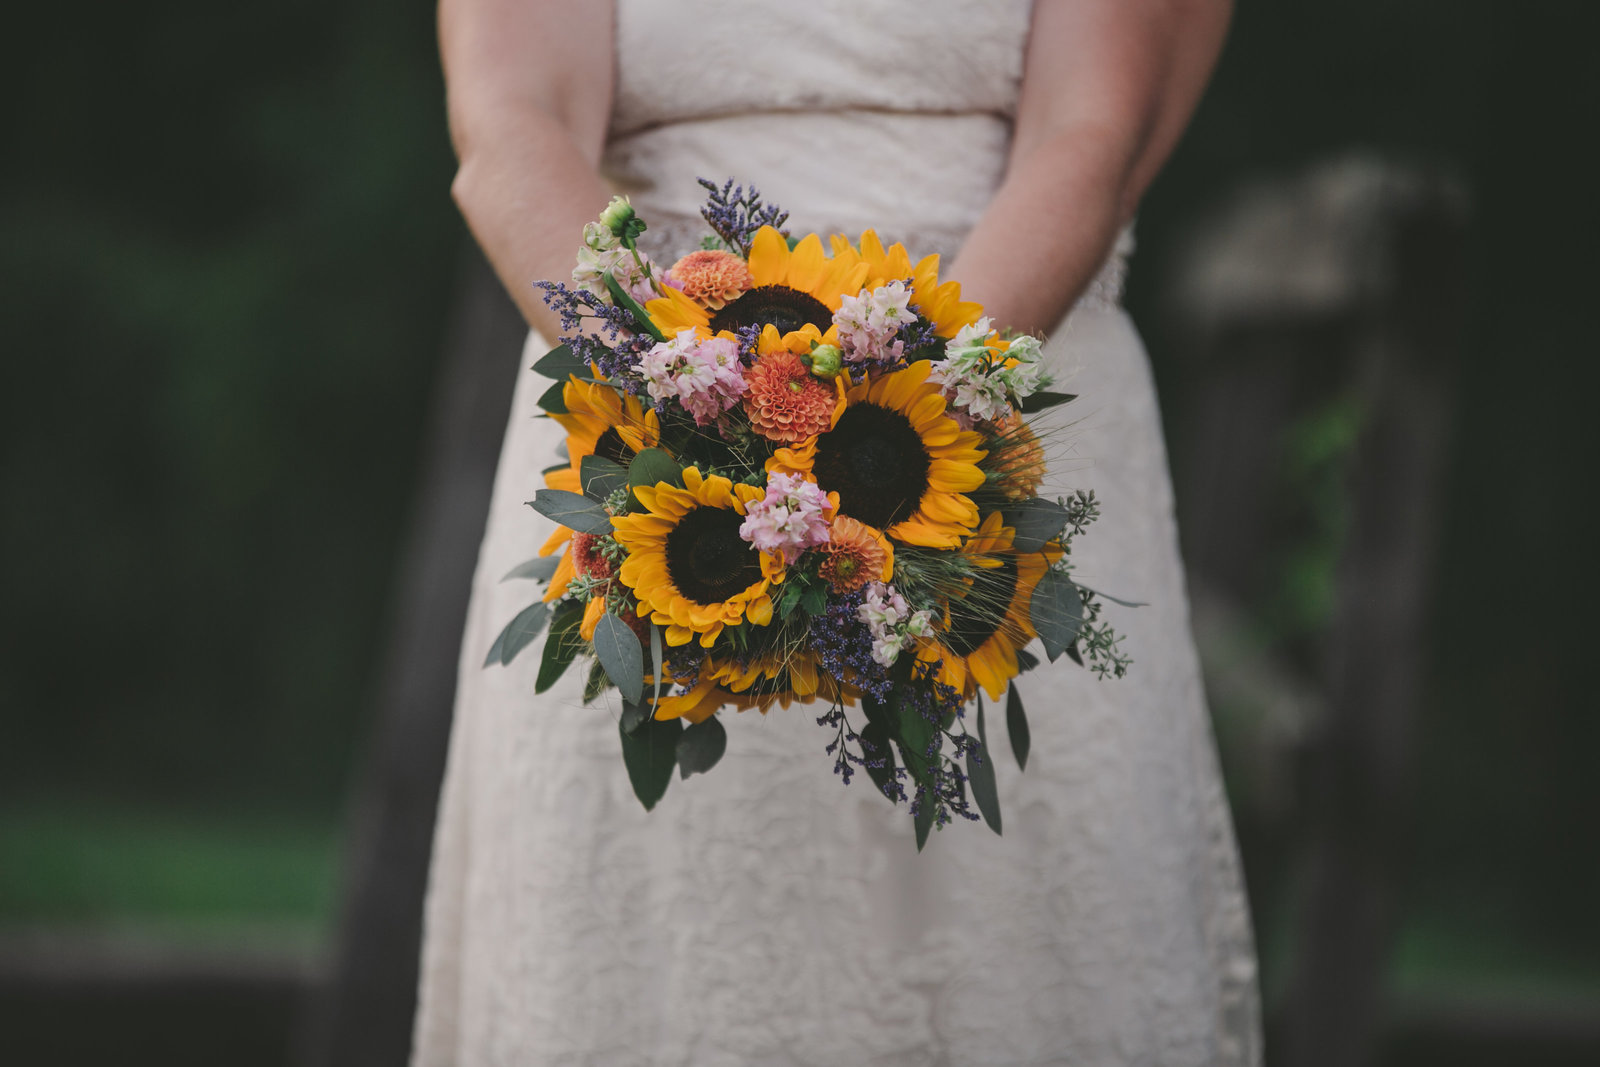 Sunflowers and baby's breath brides bouquet